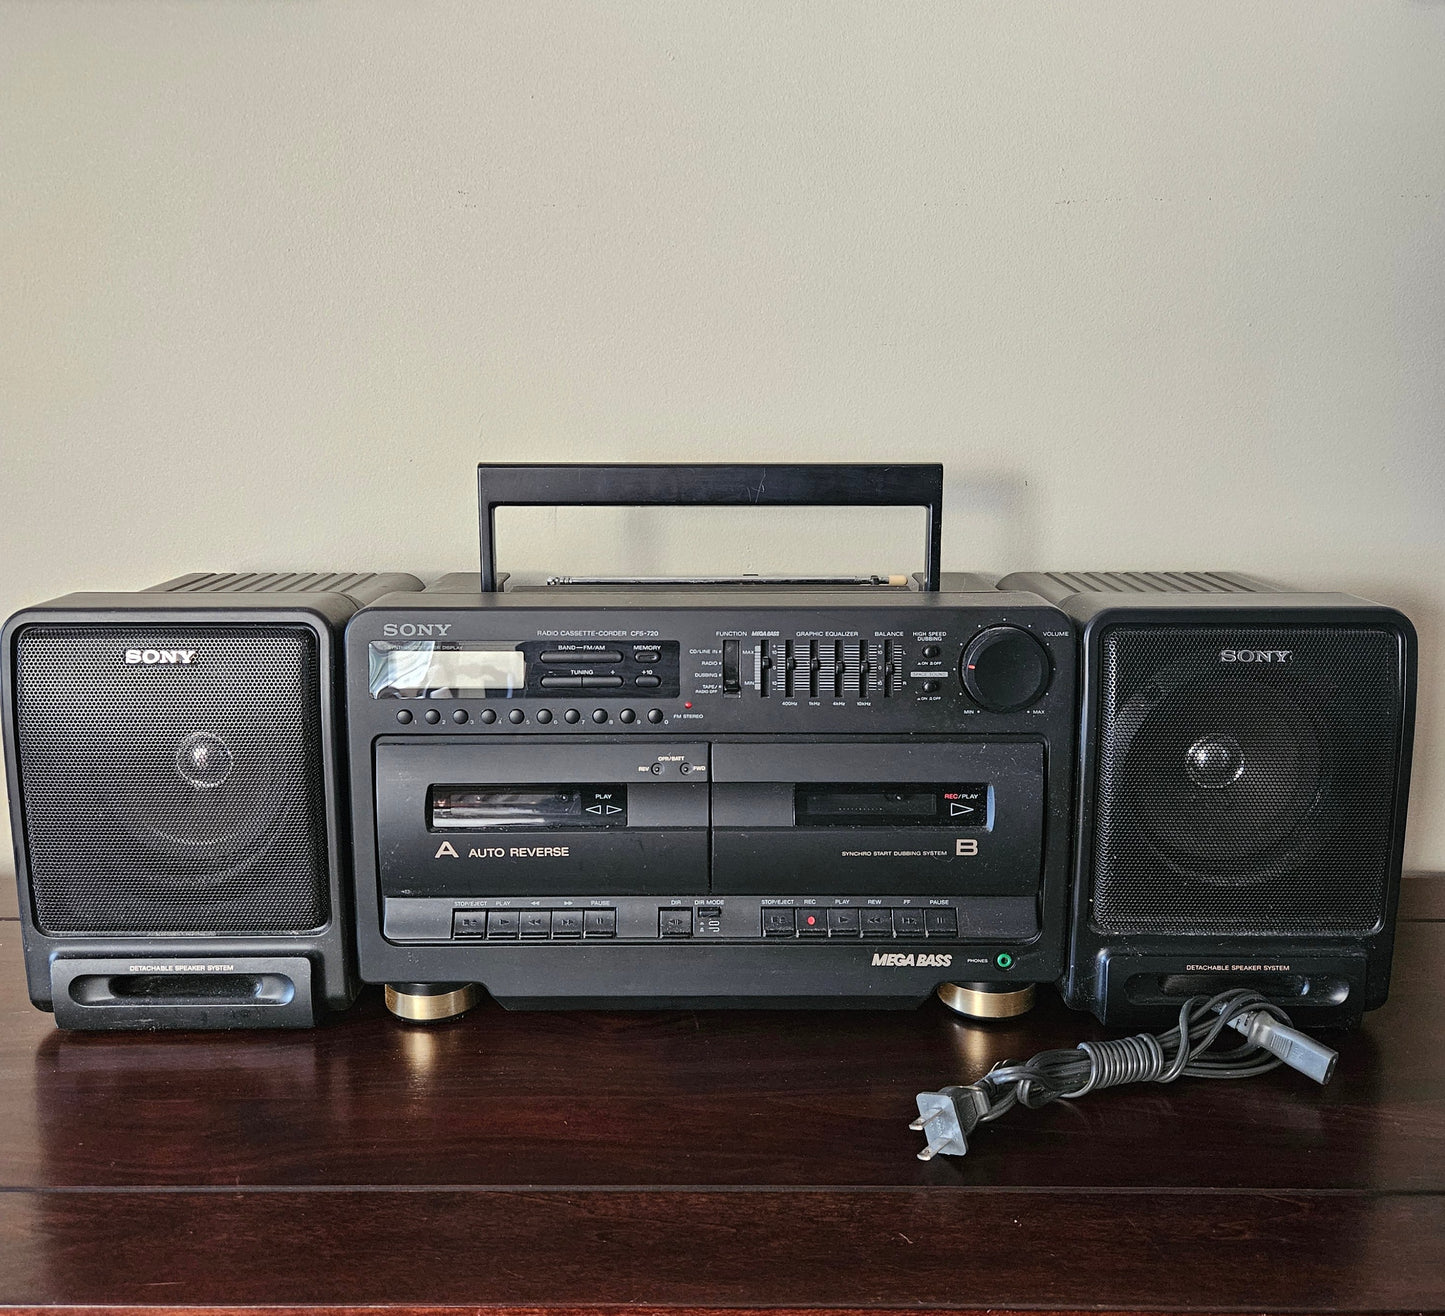 Vintage Sony Boombox CFS-720 Audio-Cassette Recorder with Detachable Speakers